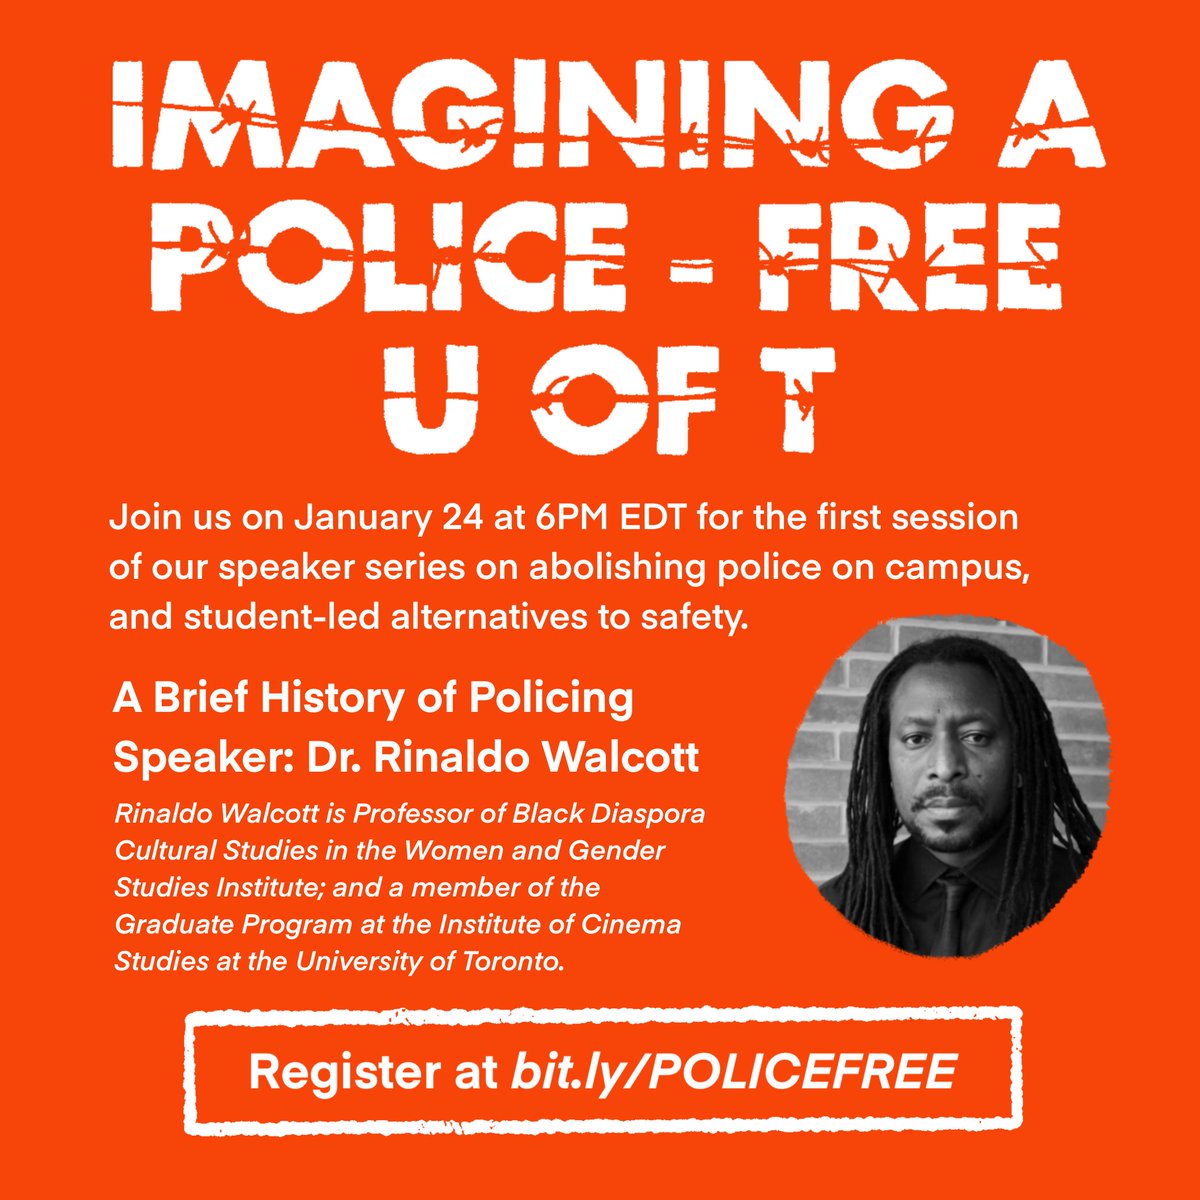 📢 In two days, we are excited to launch the 'Imagining a Police-Free UofT' series and organize around abolishing police at UofT.

Our first speaker is Dr. Rinaldo Walcott (@blacklikewho) on JAN 24 at 6PM EDT.

Register: bit.ly/POLICEFREE

#PoliceFreeSchools #CopsOffCampus